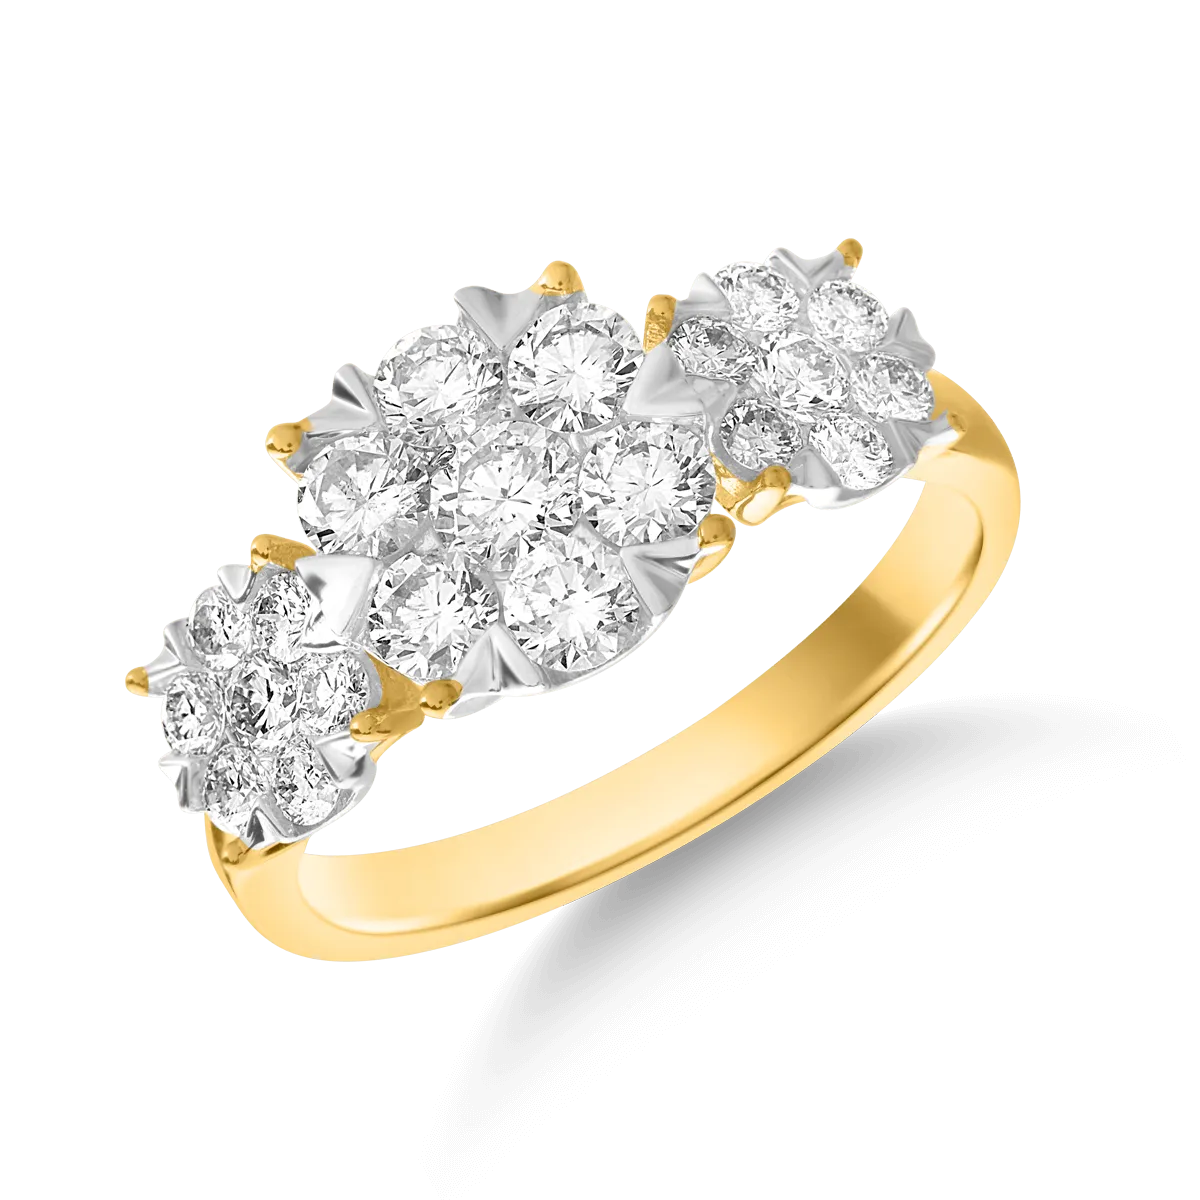 18k yellow gold ring with 1ct diamond